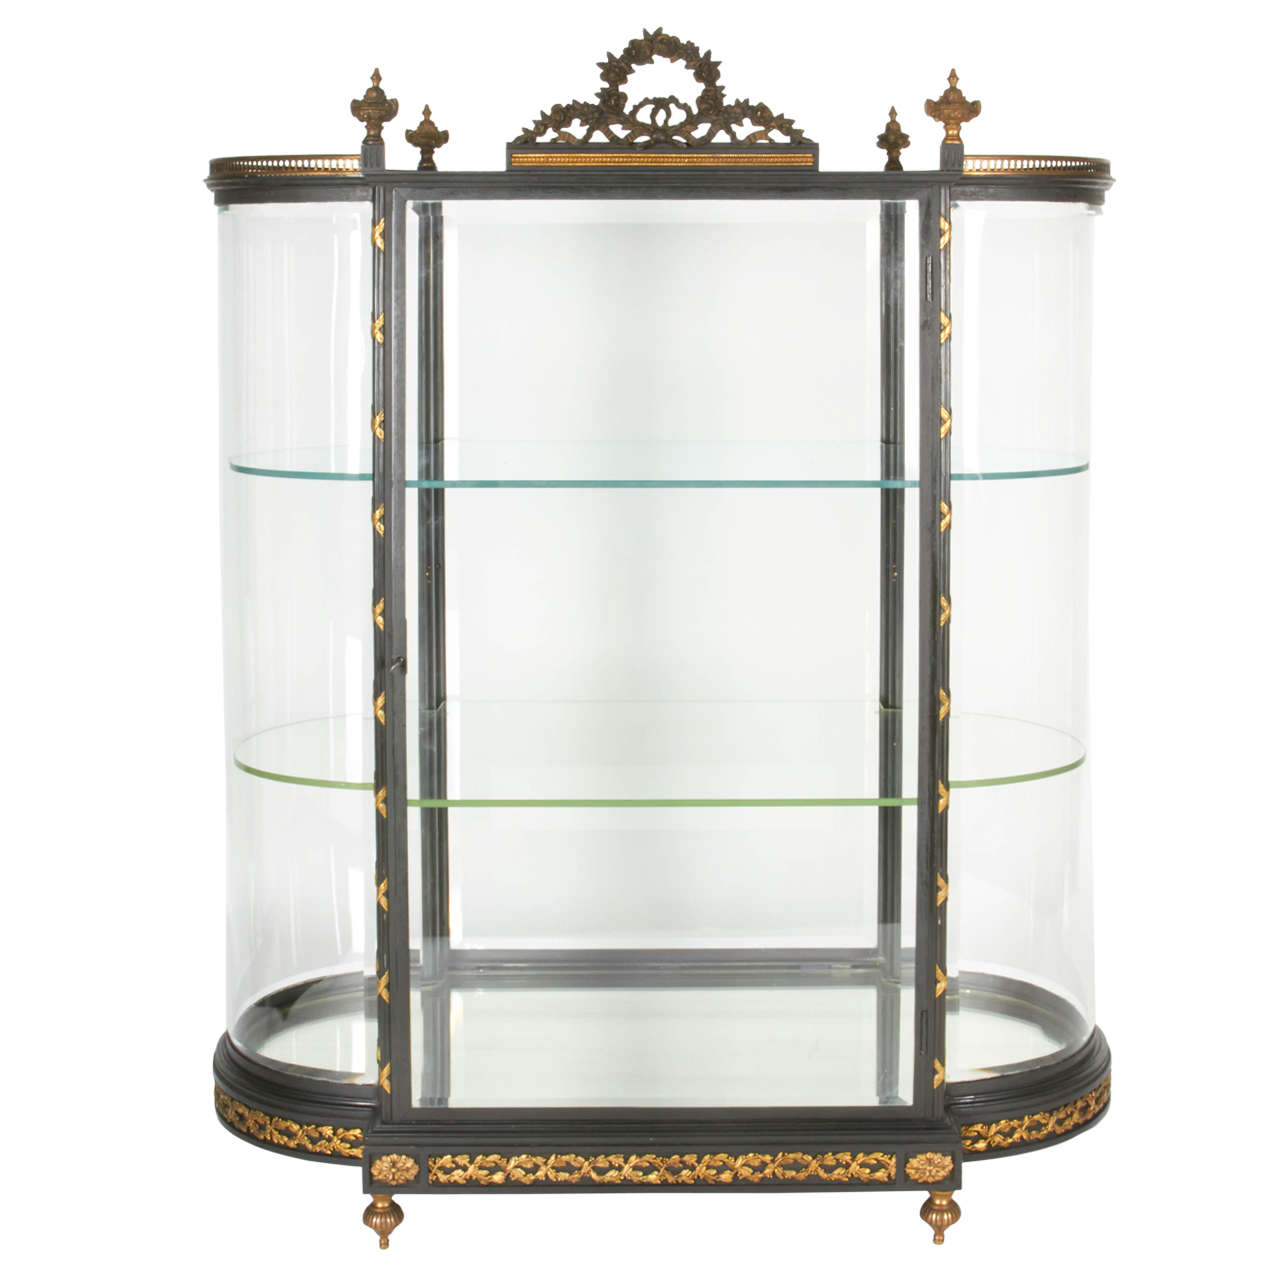 Antique Glass, Bronze and Steel Jewelry Showcase or Vitrine For Sale